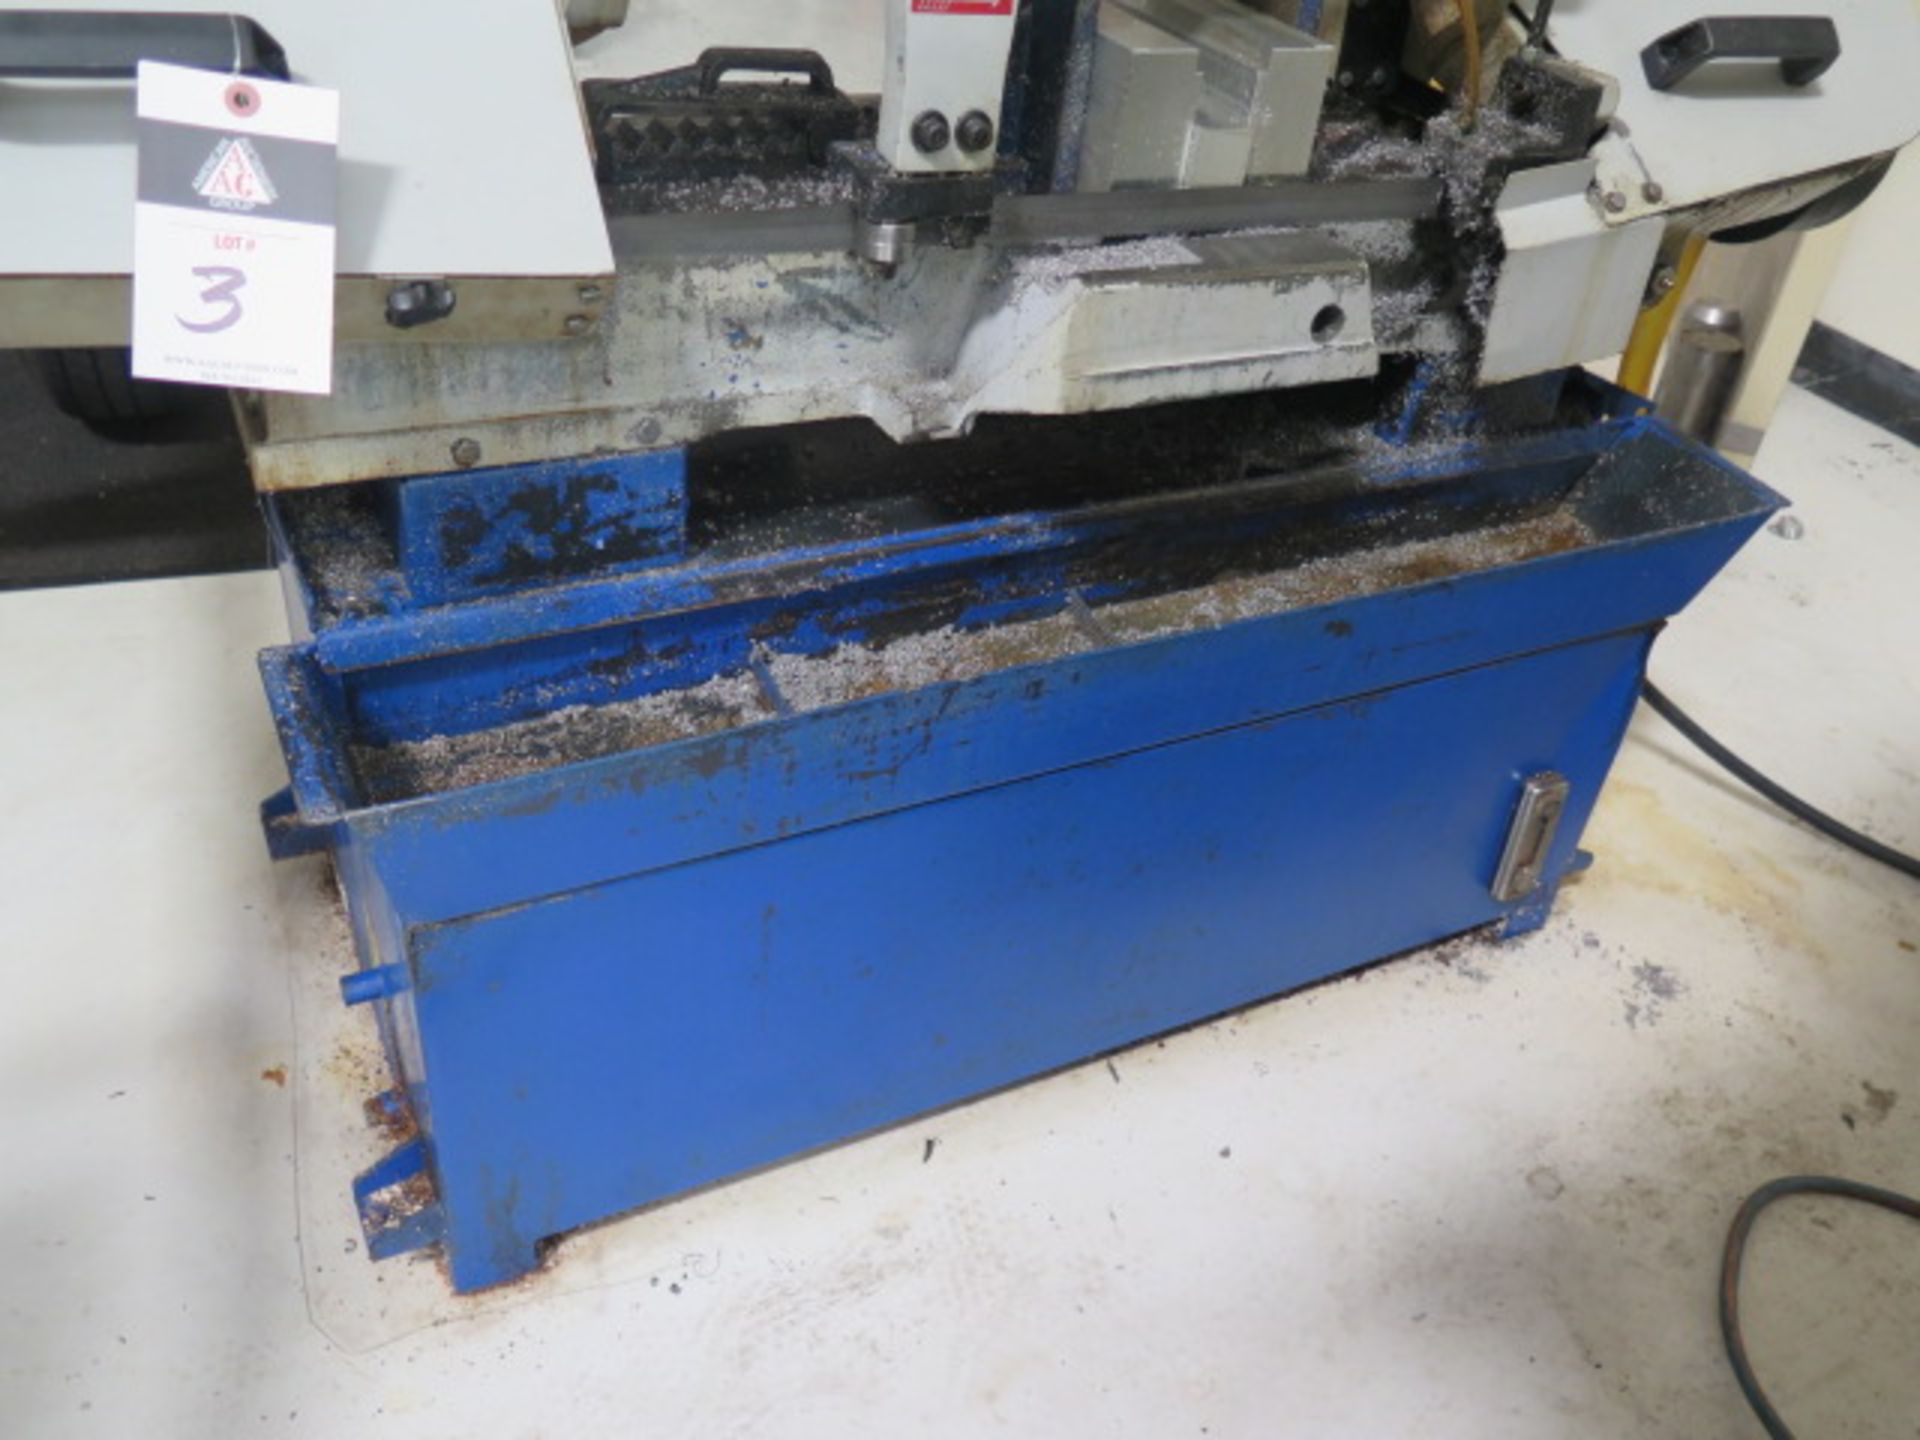 Eisen UE-916A 9” Horizontal Band Saw s/n 09014103 w/ 4-Speeds, Manual Clamping, Coolant - Image 3 of 10